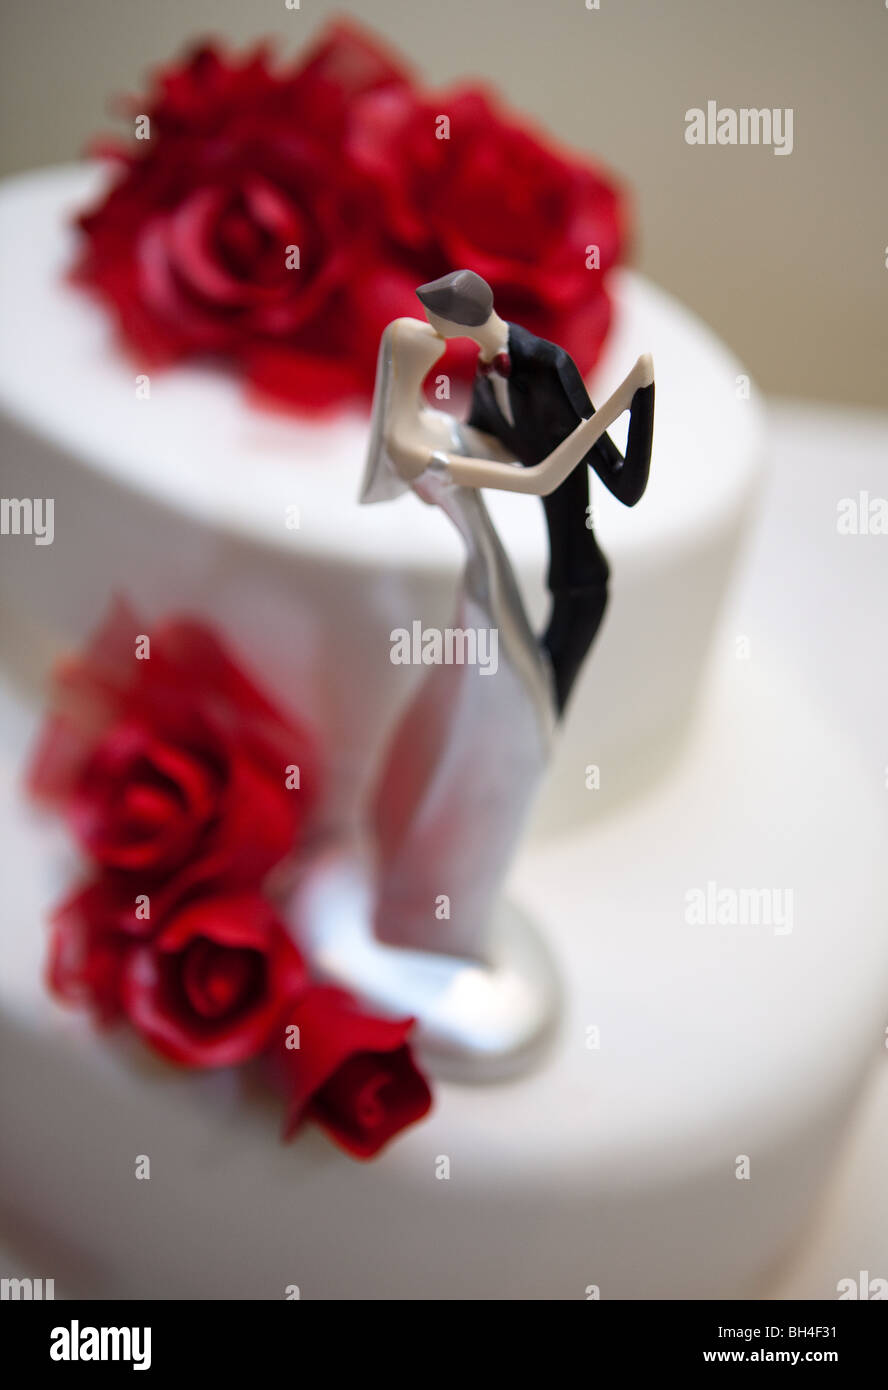 Wedding cake with bride and groom on top Stock Photo